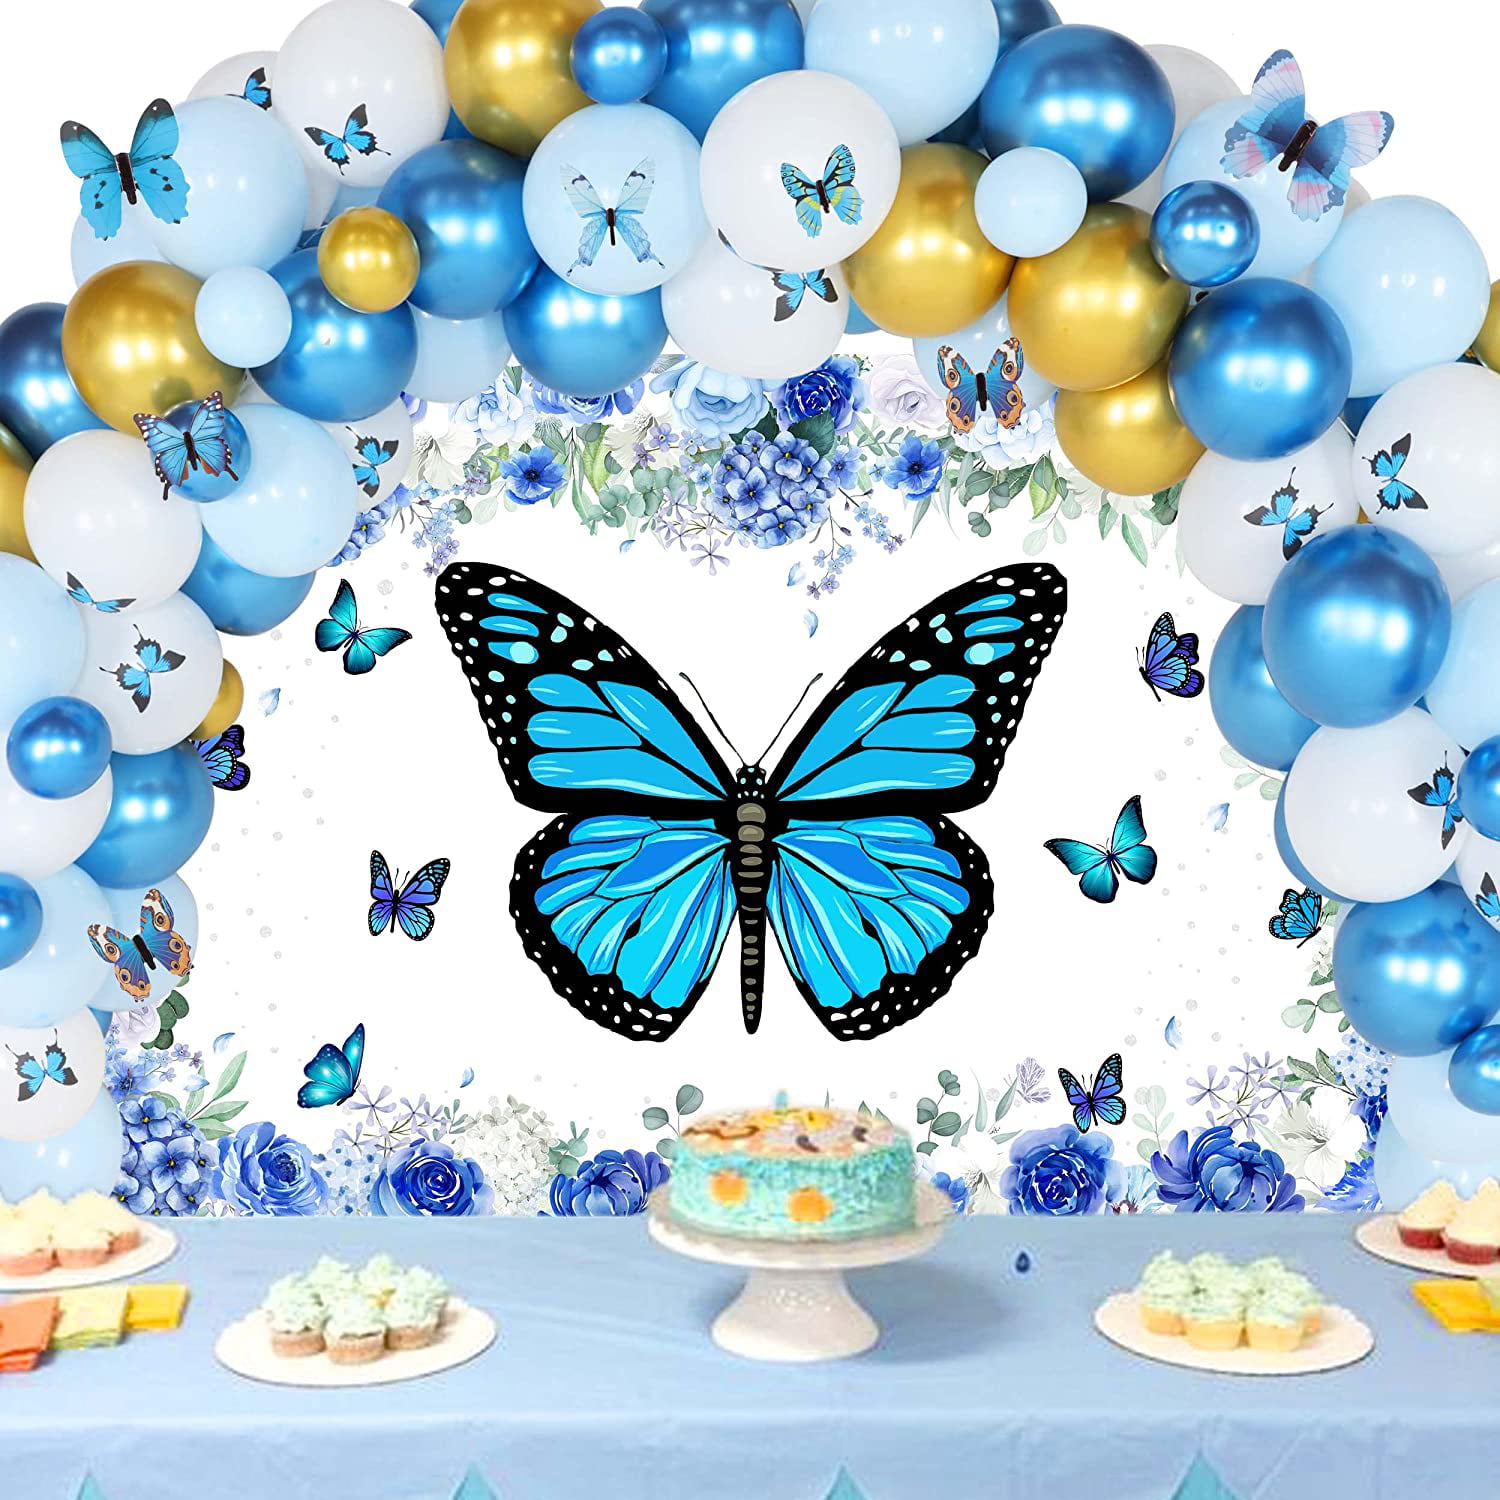 6pcs 3D Butterflies/Butterfly Cutouts/Butterfly Baby Shower/Birthday Party